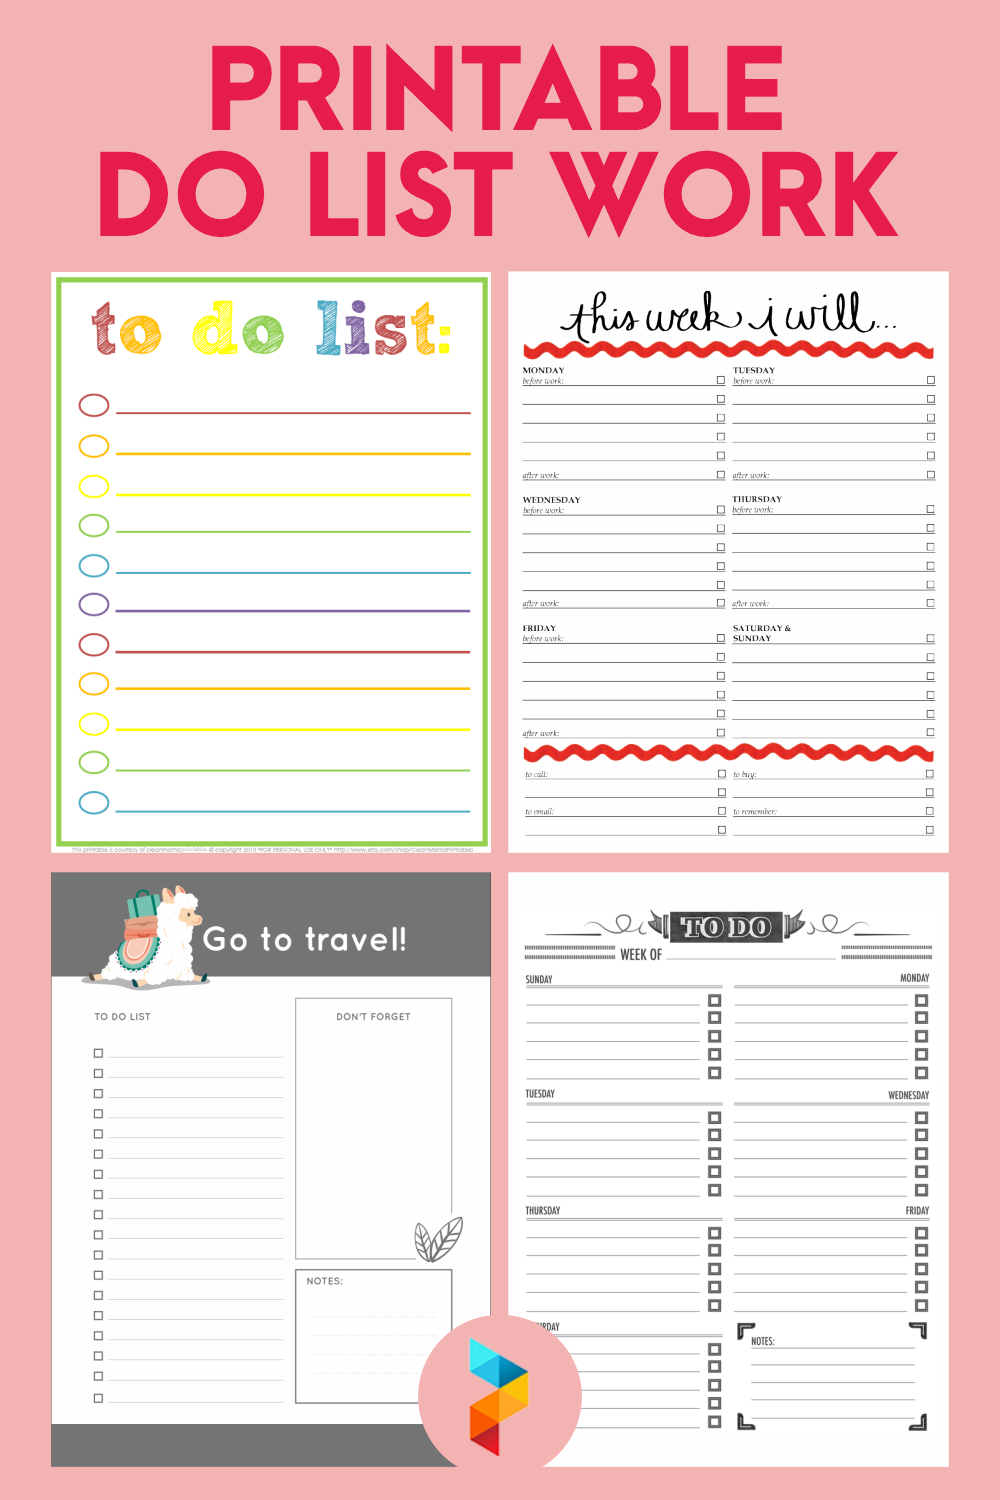 Free Printable Daily To Do List For Work